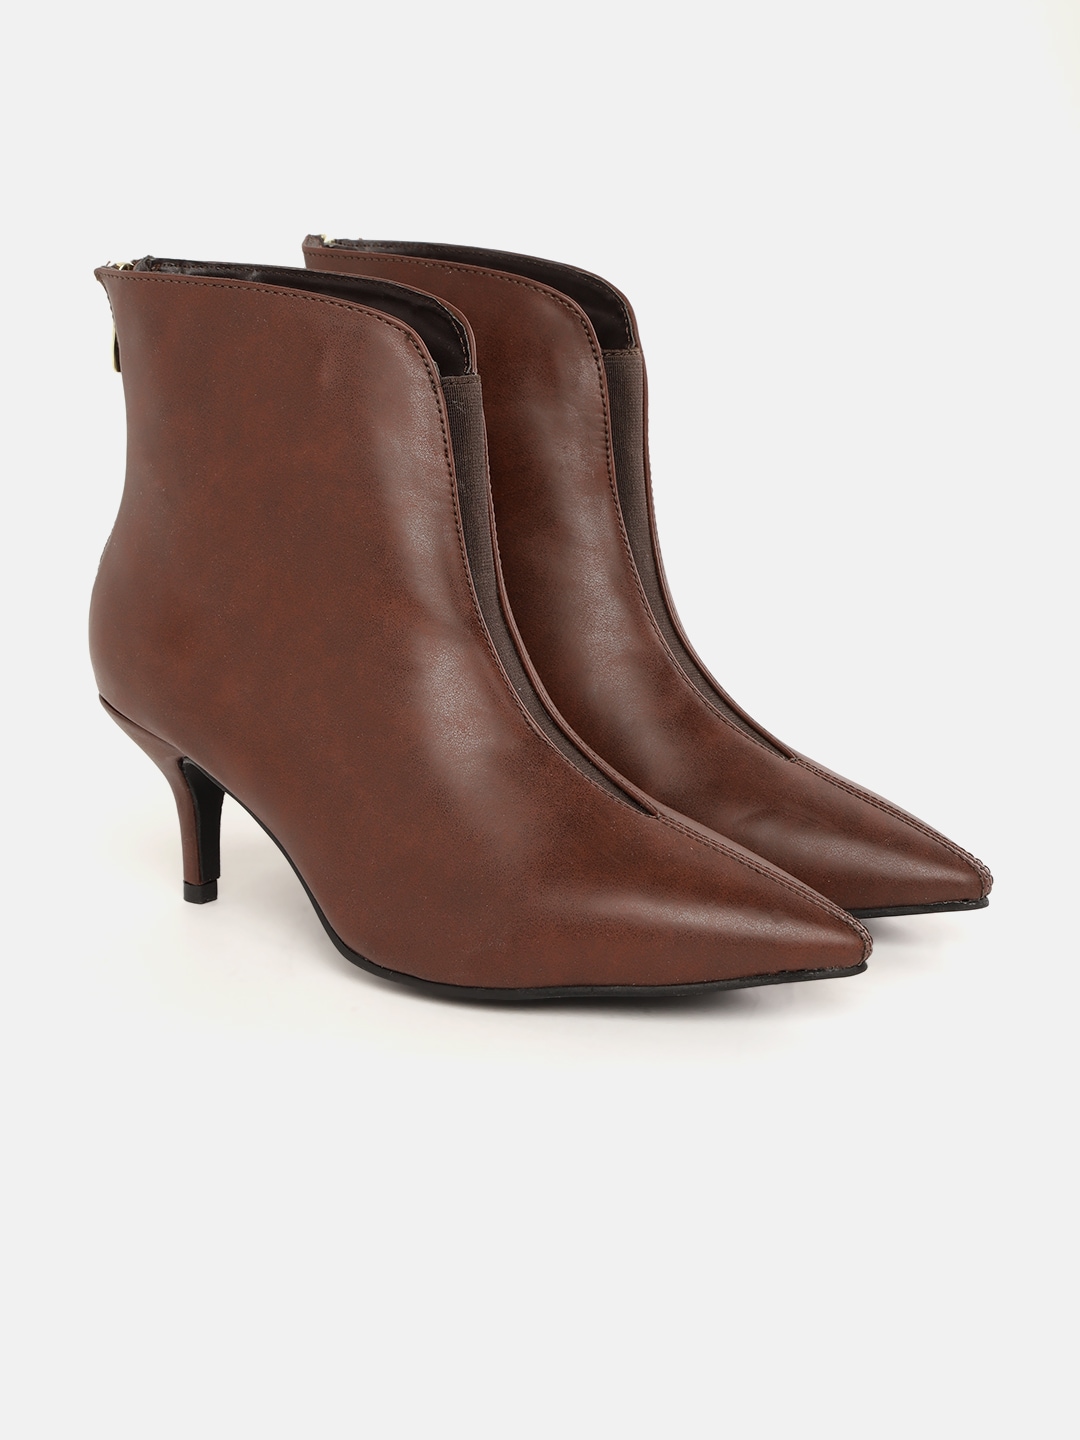 DressBerry Women Coffee Brown Solid Mid-Top Heeled Boots Price in India